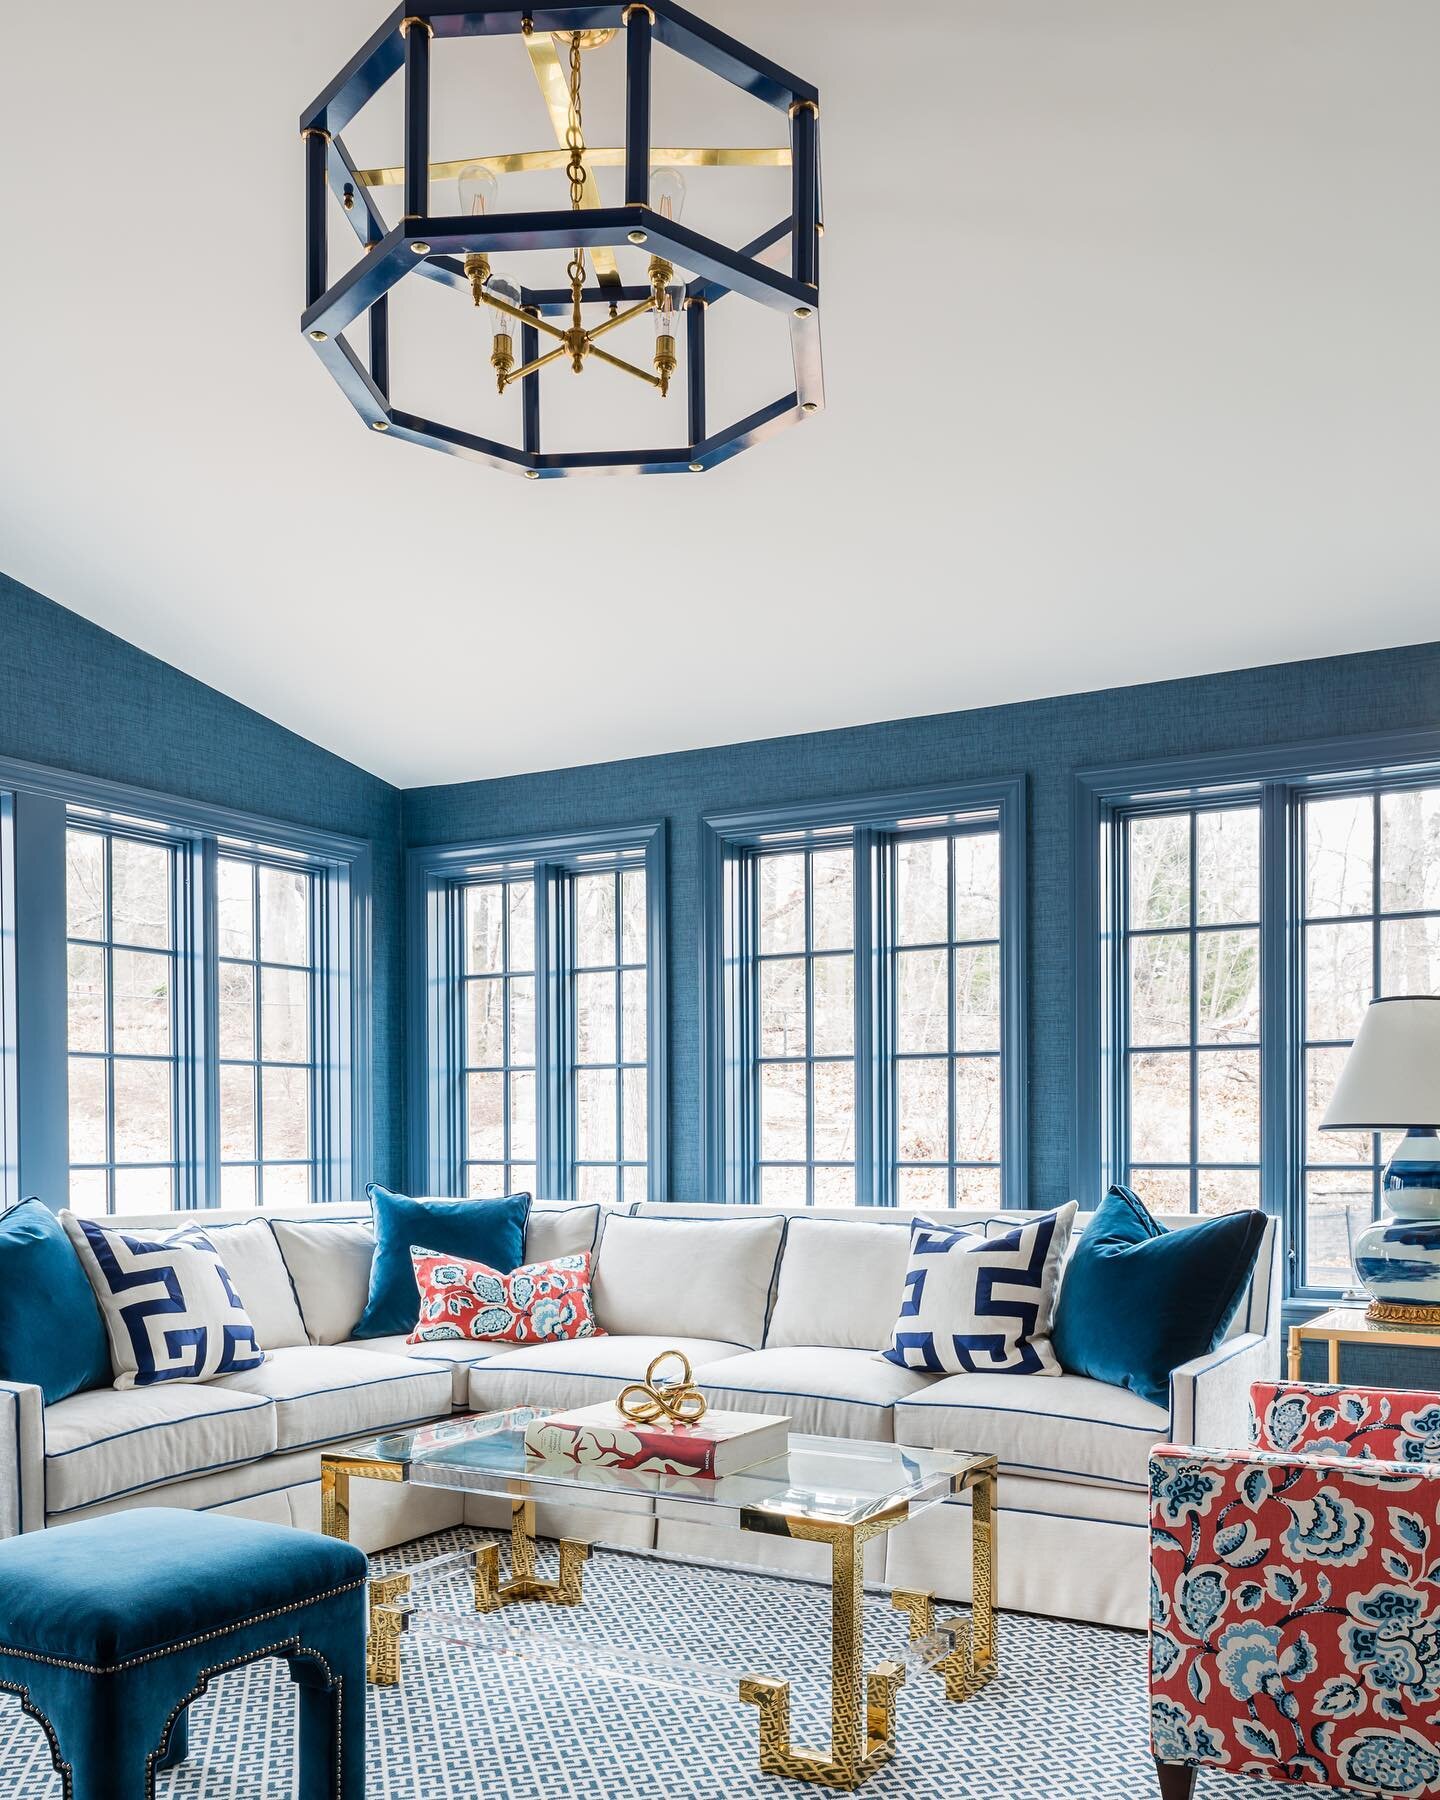 This @dunesandduchess Navy lacquered Octo pendant is the star of the show in this room⭐️💫Design: @trellishomedesign 📸: @jessicadelaneyphotography #trellishomedesign #interiordesign #familyroom #sunroom #livableluxury #colorful #blueandwhite #boston